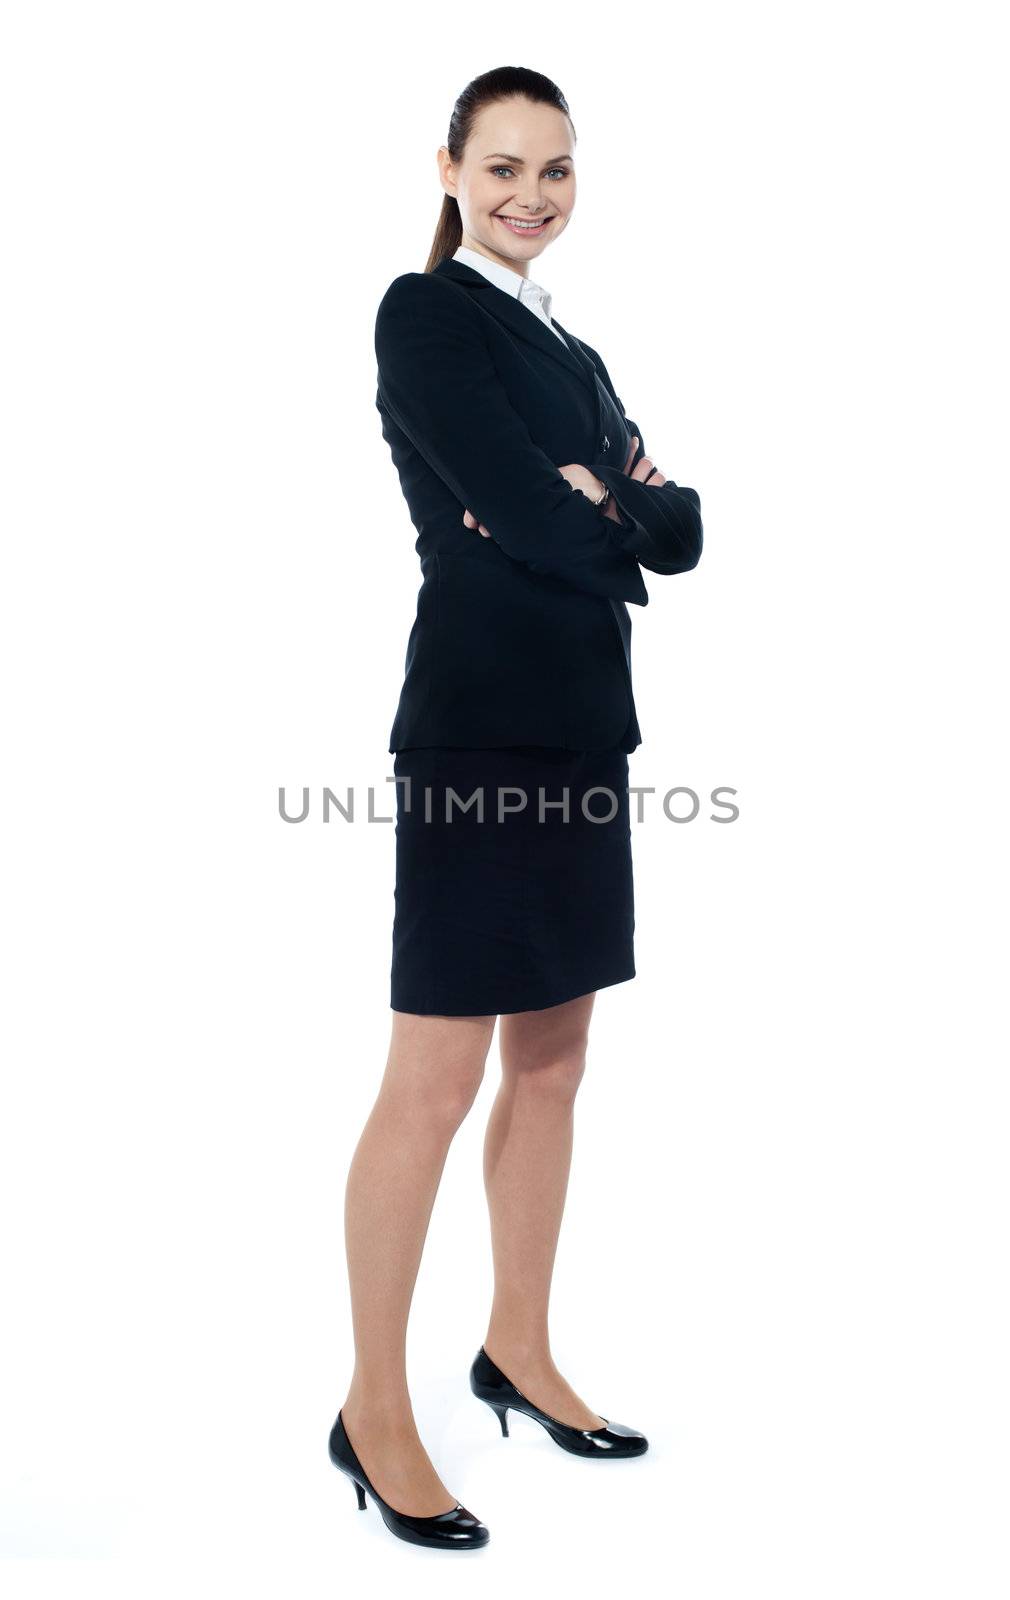 Confident ceo posing in style by stockyimages